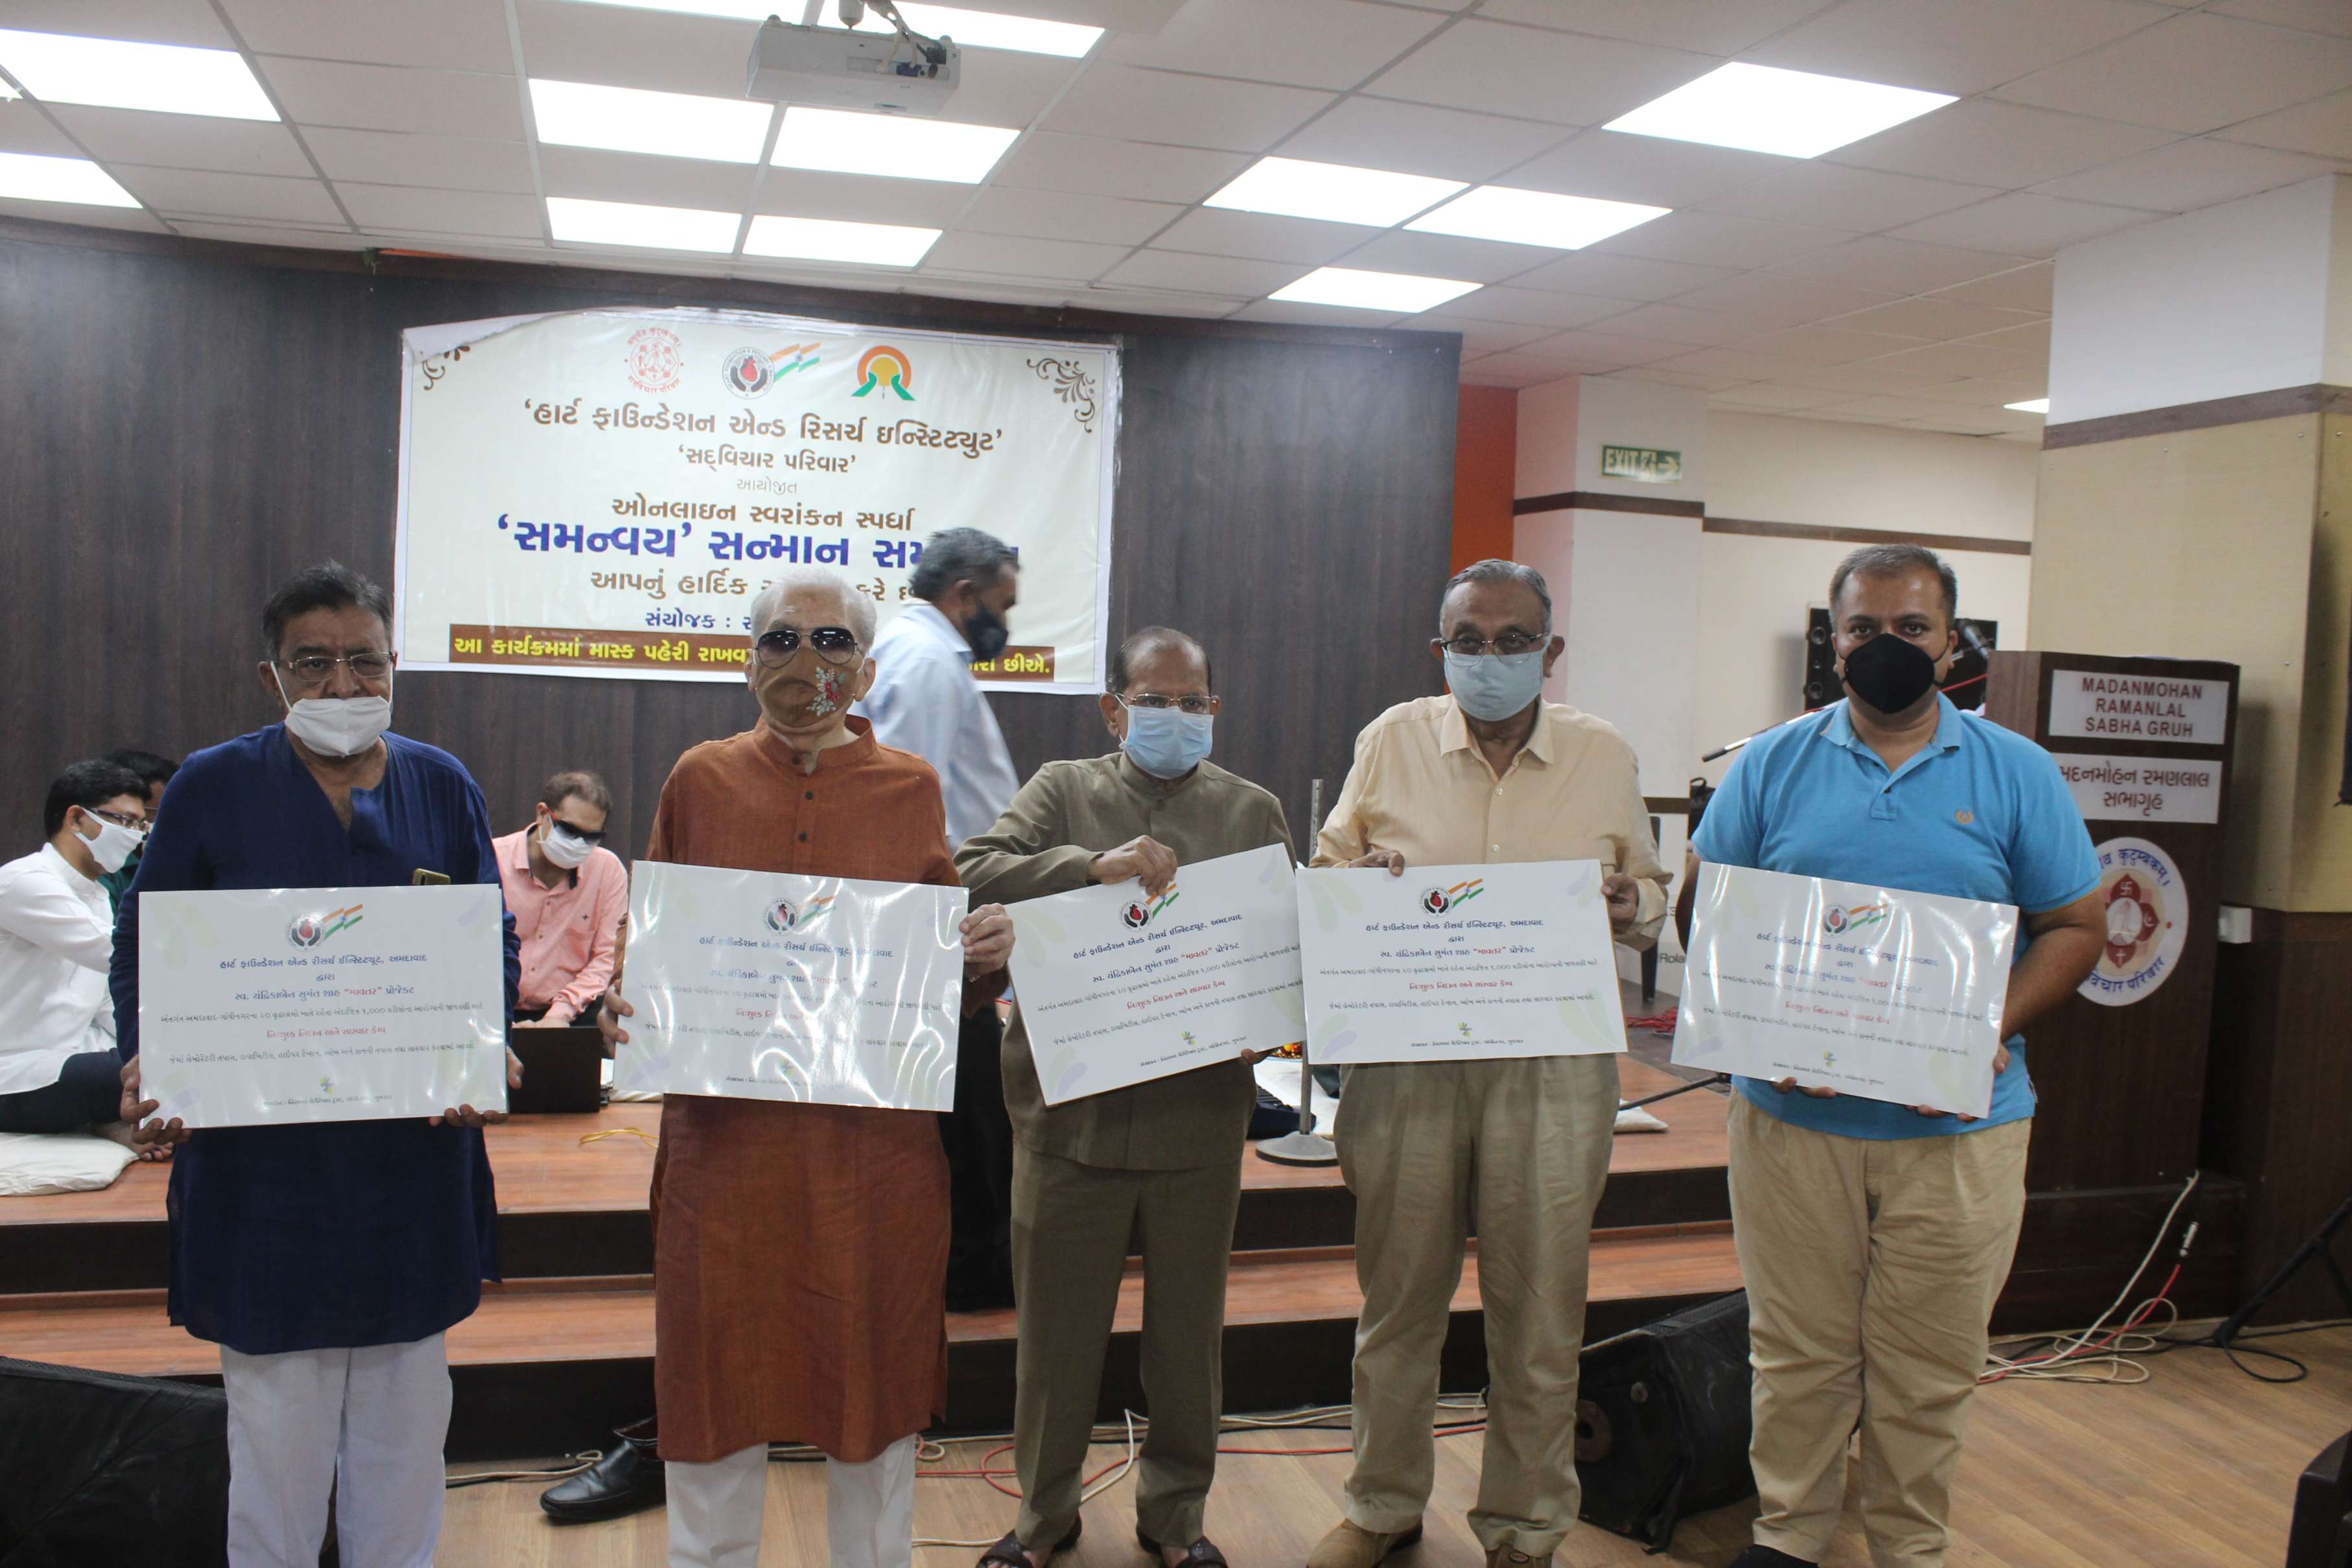 Distribution of prizes, award and appreciation certificates to especially visually impaired people